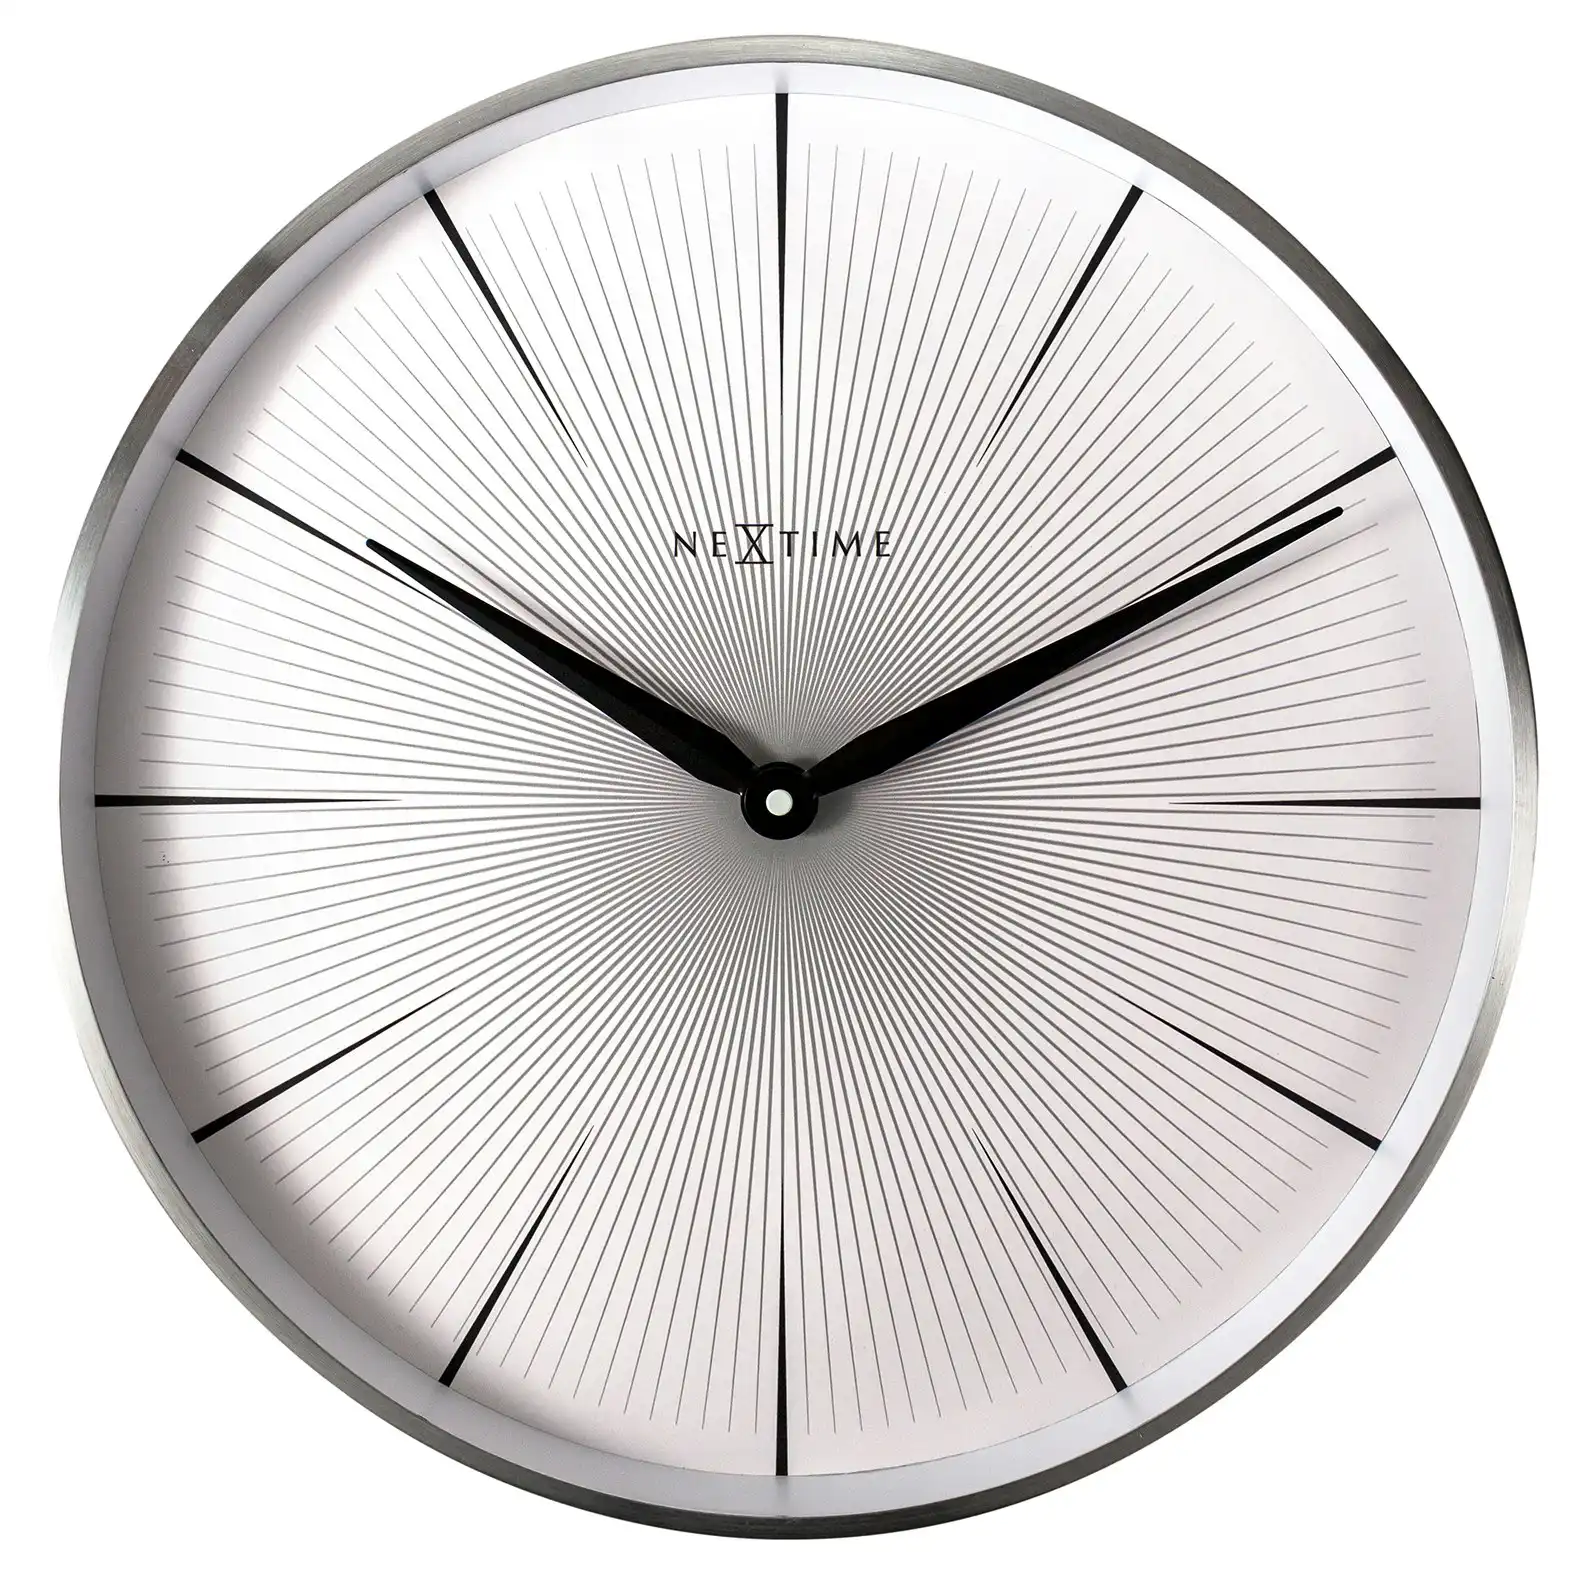 NeXtime 40cm 2 Seconds Silent Non-Ticking Round Analogue Metal Wall Clock White